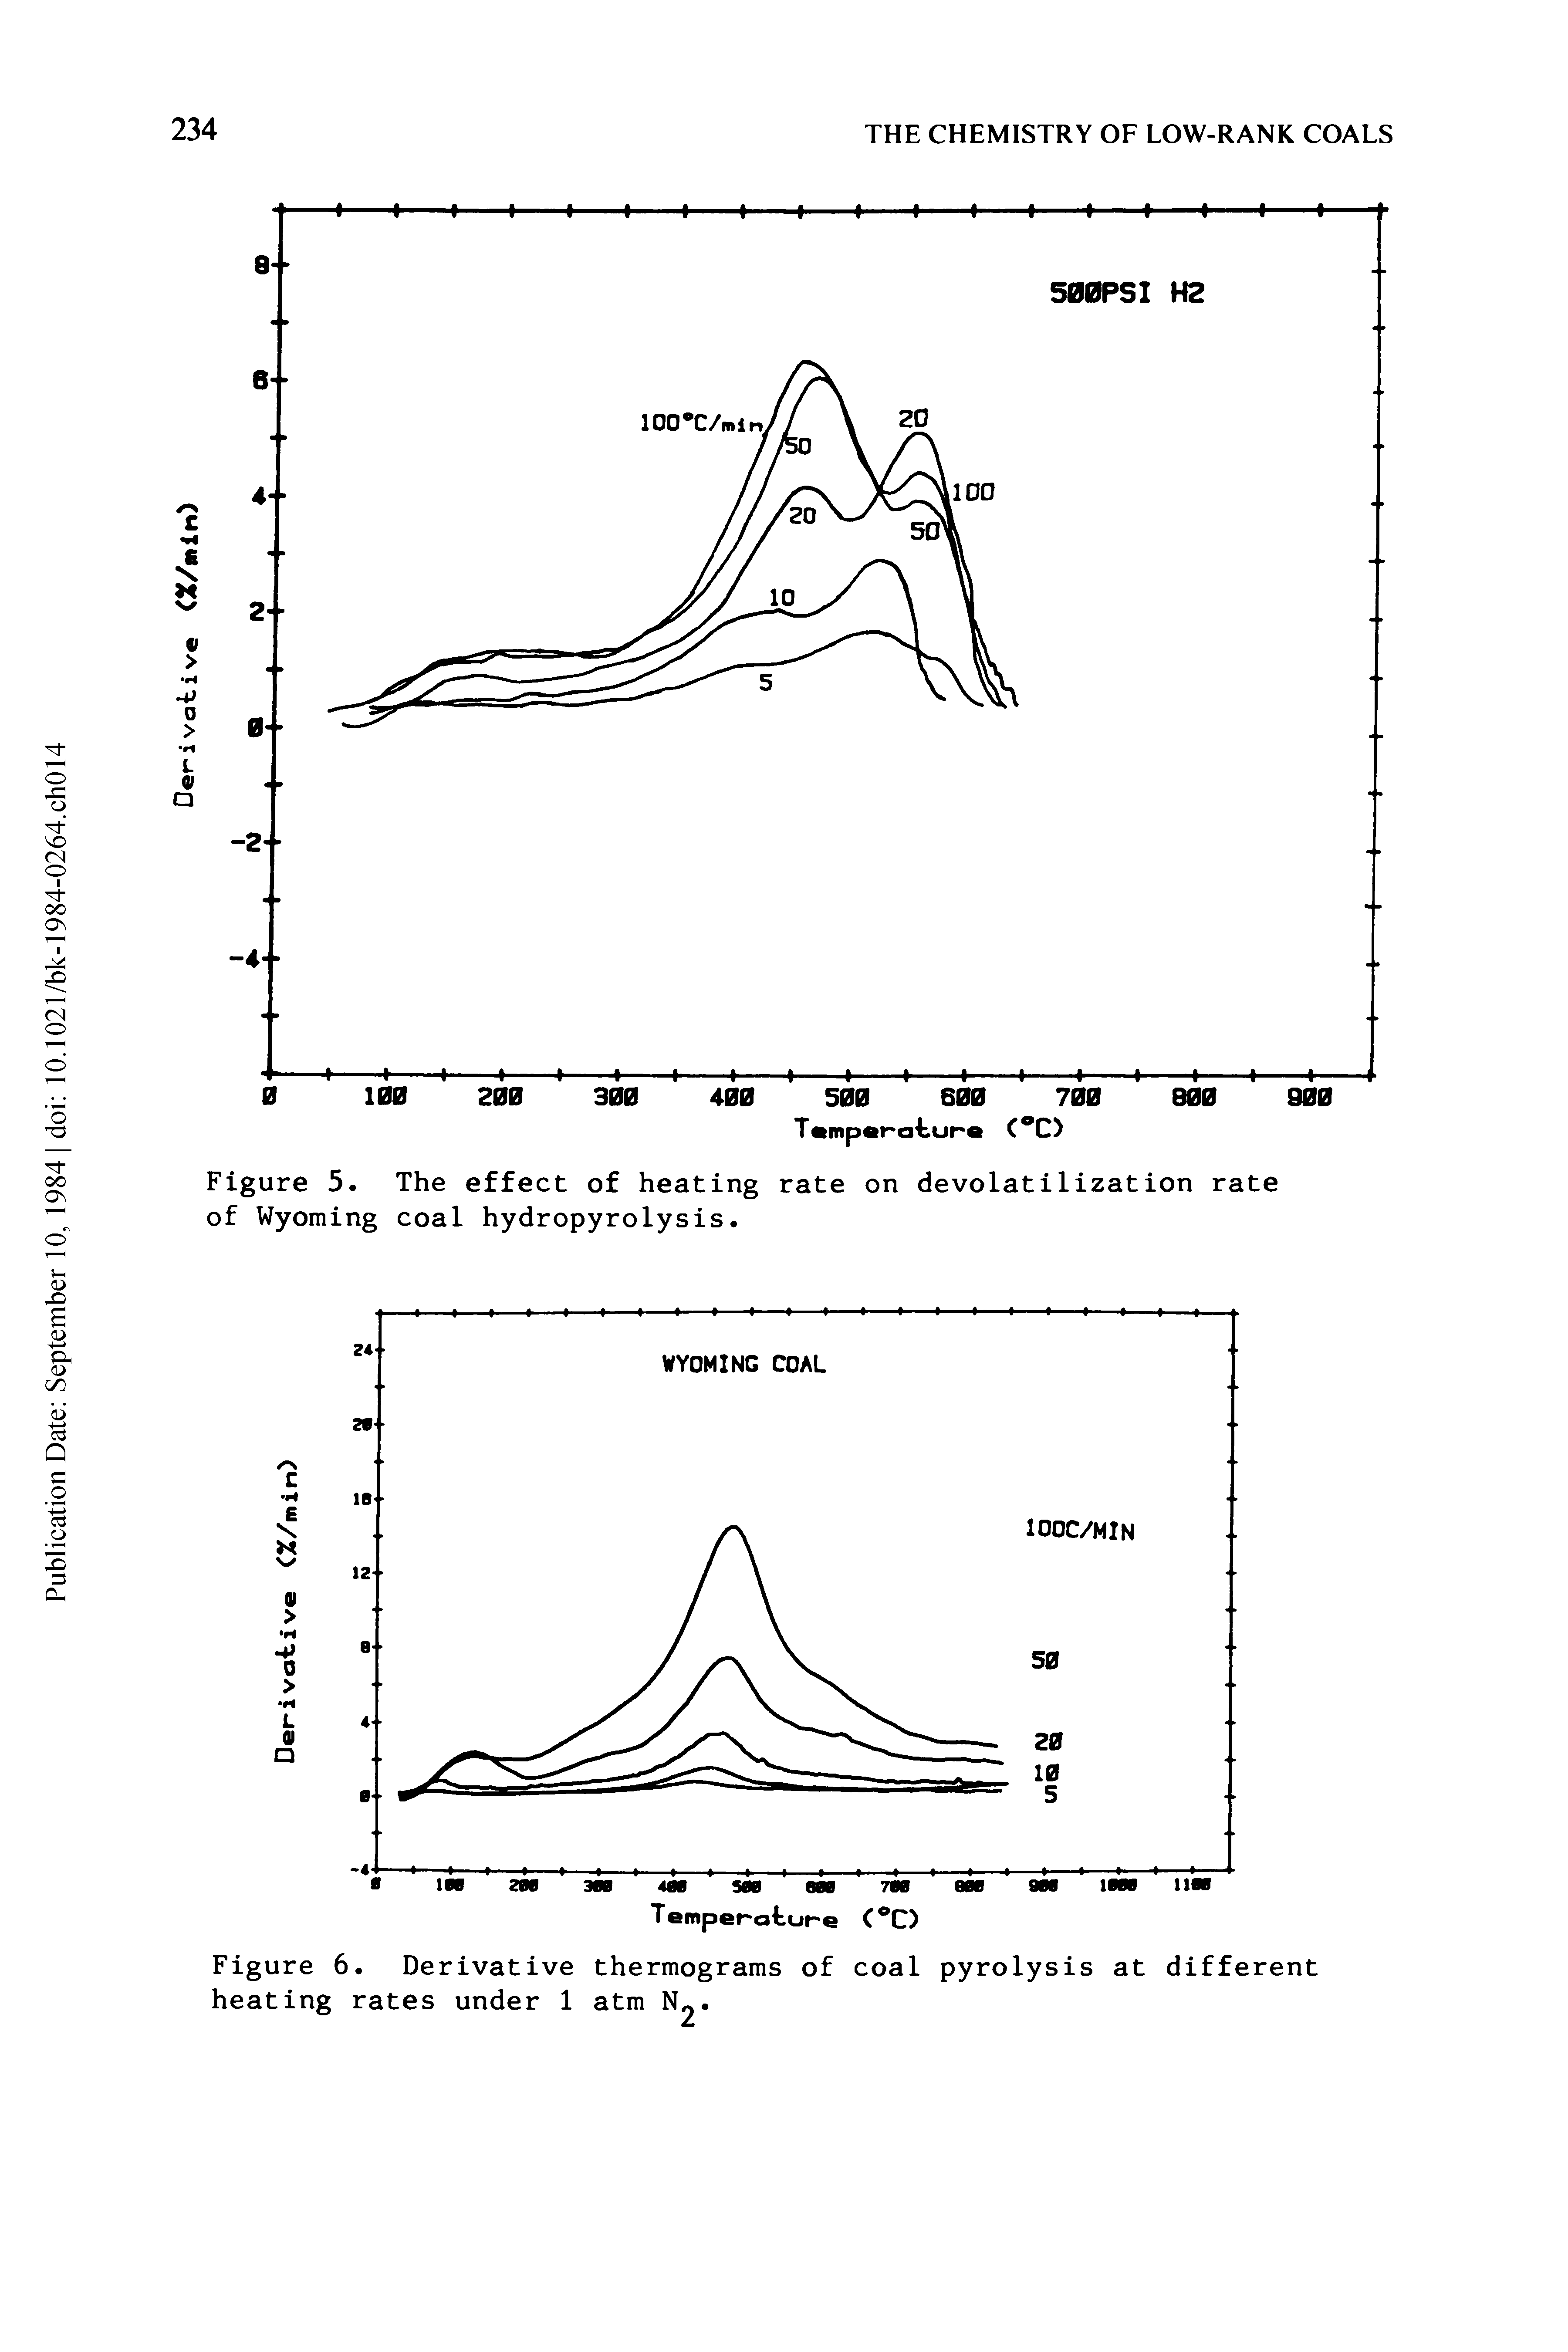 Figure 5. The effect of heating rate on devolatilization rate of Wyoming coal hydropyrolysis.